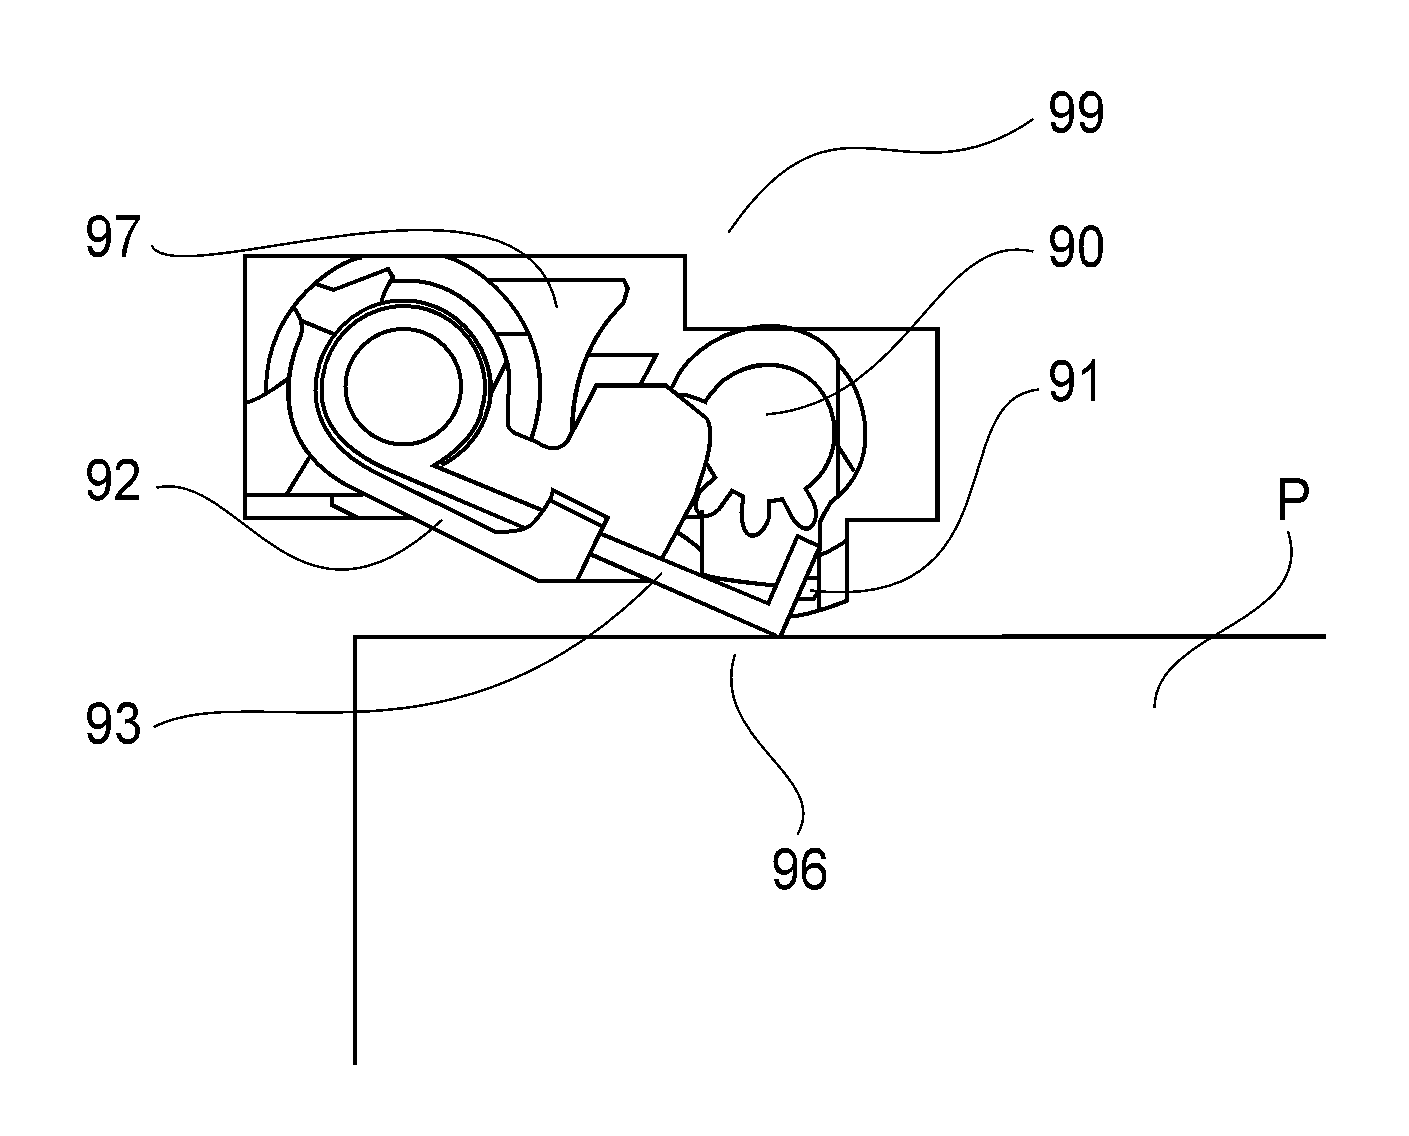 Image forming apparatus with movable cartridge pressing member